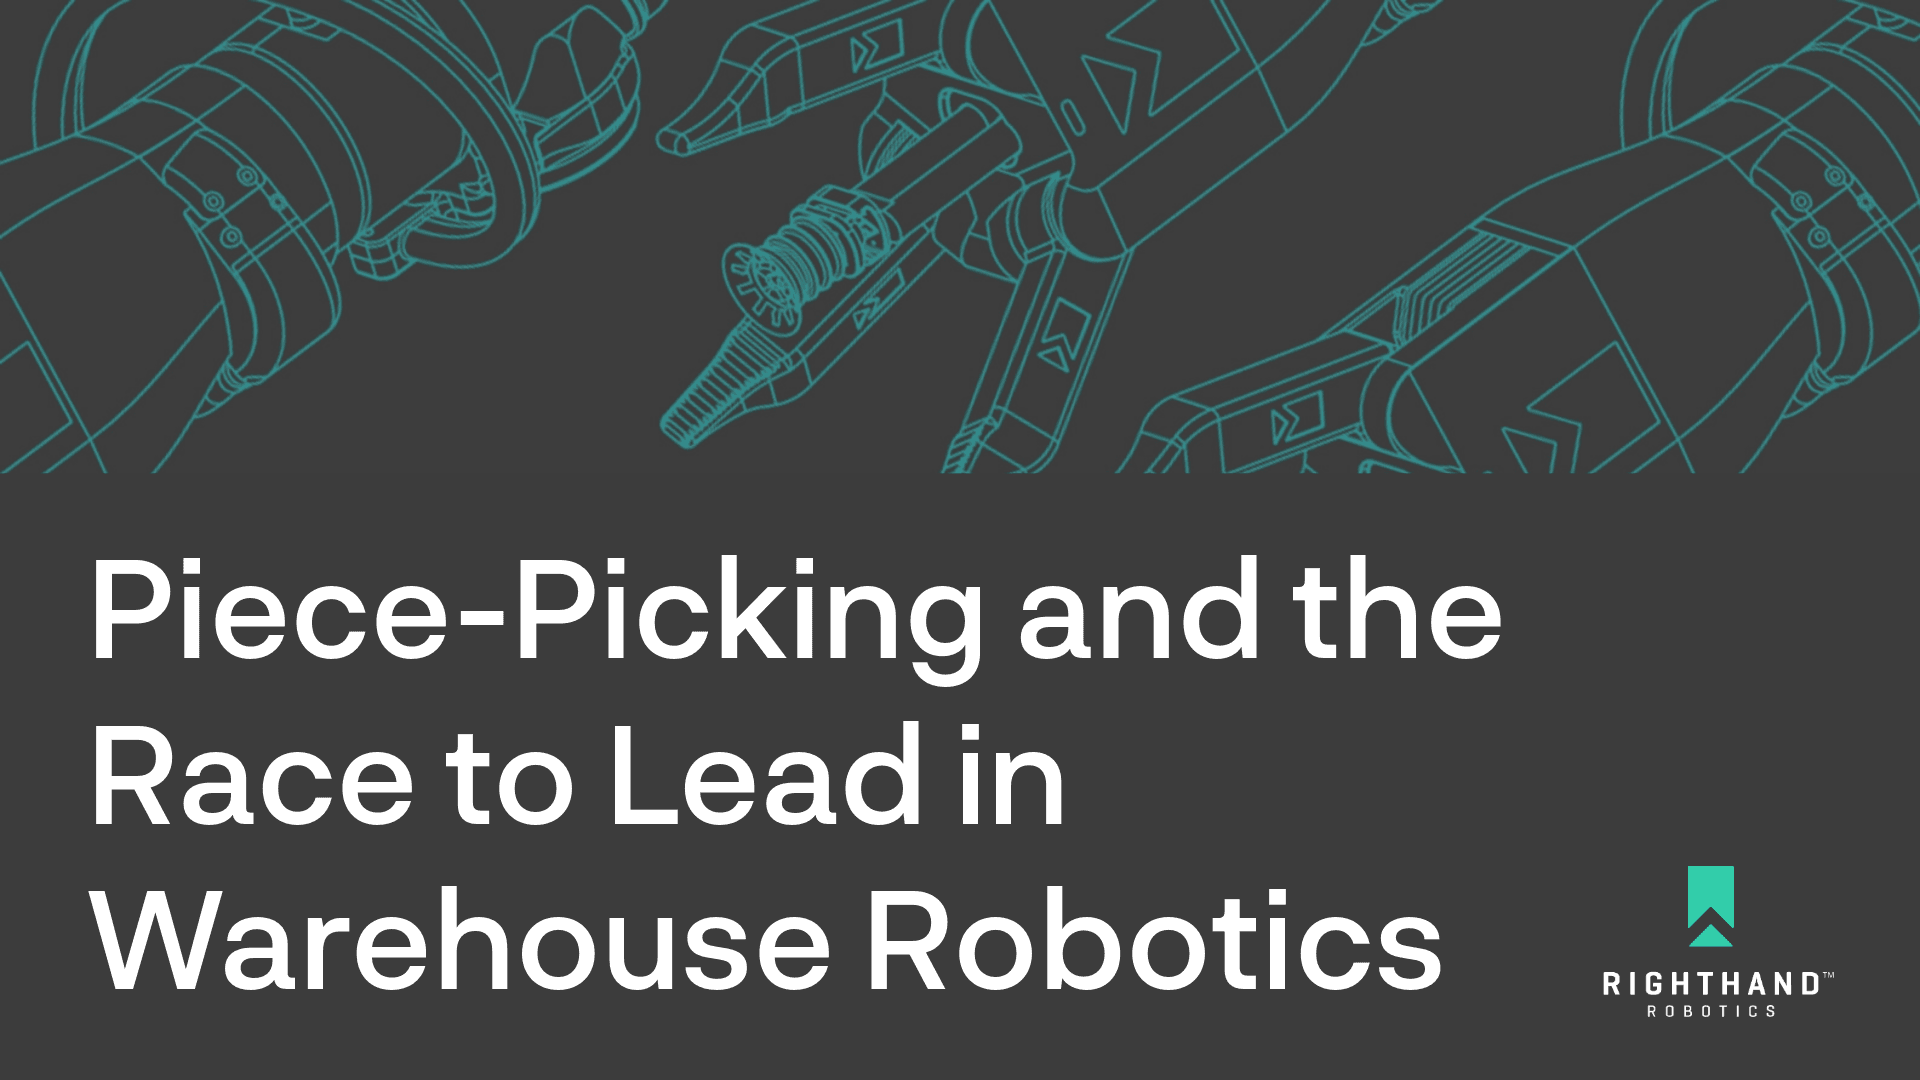 The Latest Article: Piece-picking and the race to lead in warehouse robotics